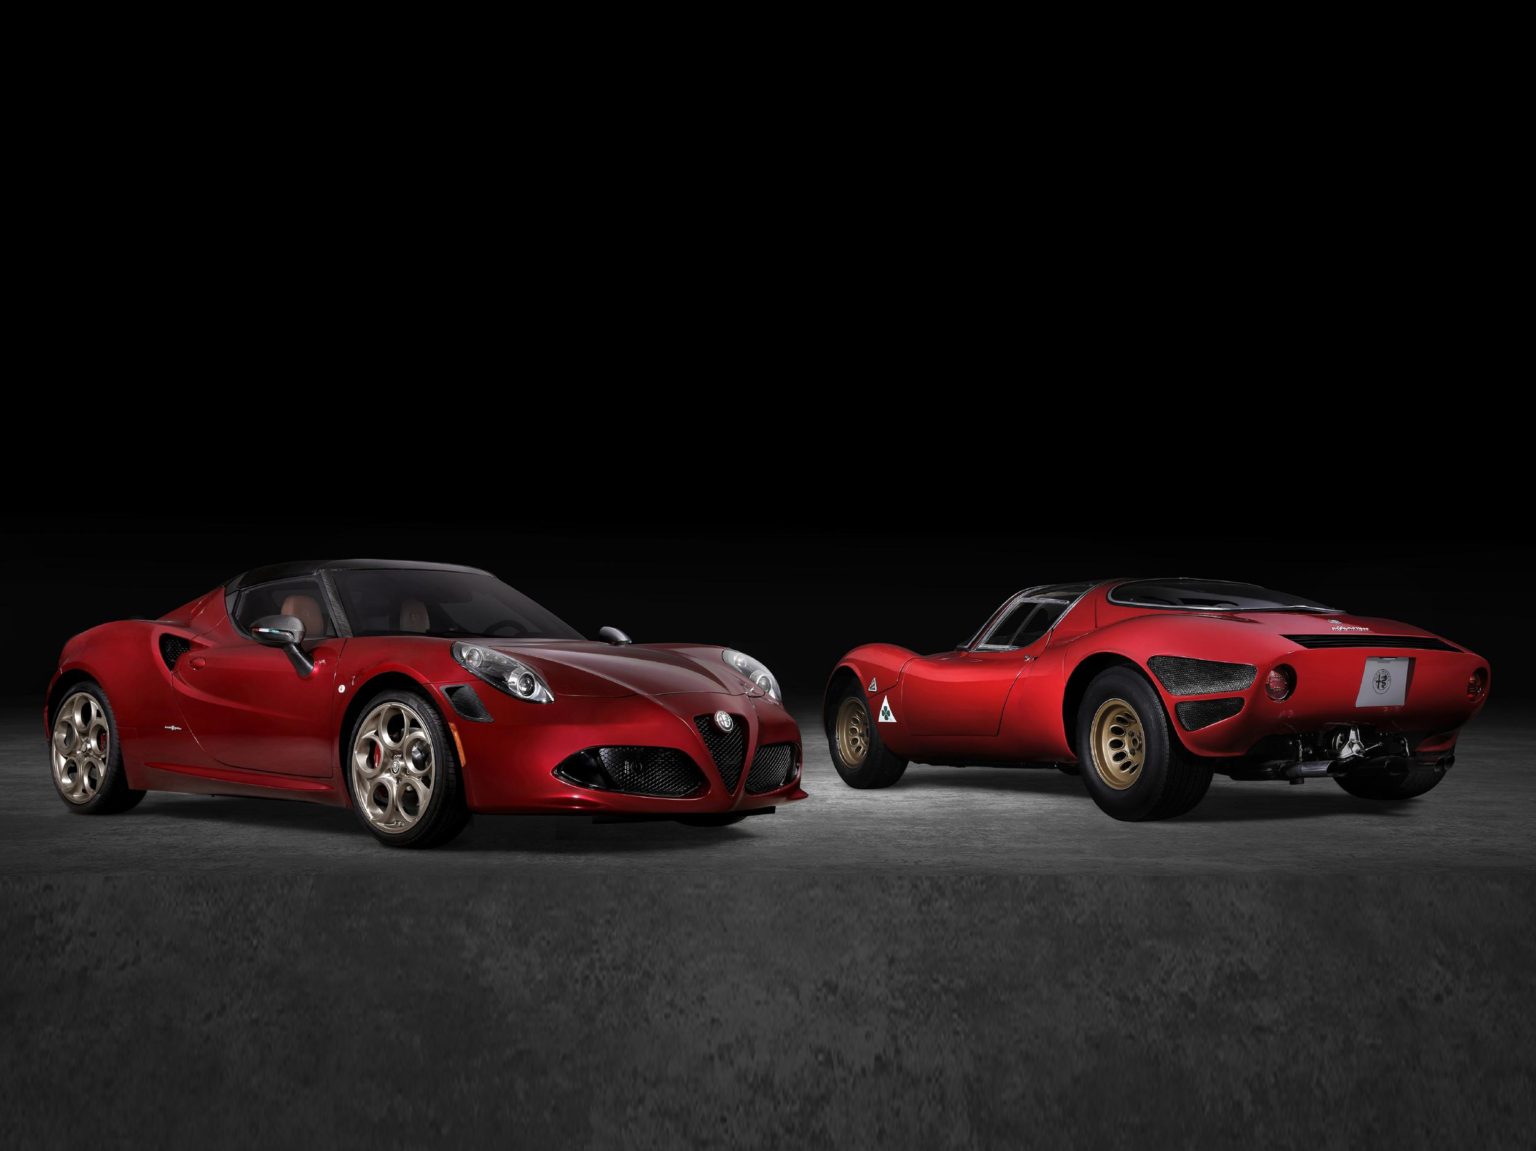 The Alfa Romeo 4C Spider 33 Stradale Tributo is the last 4C model that will be sold in the U.S.